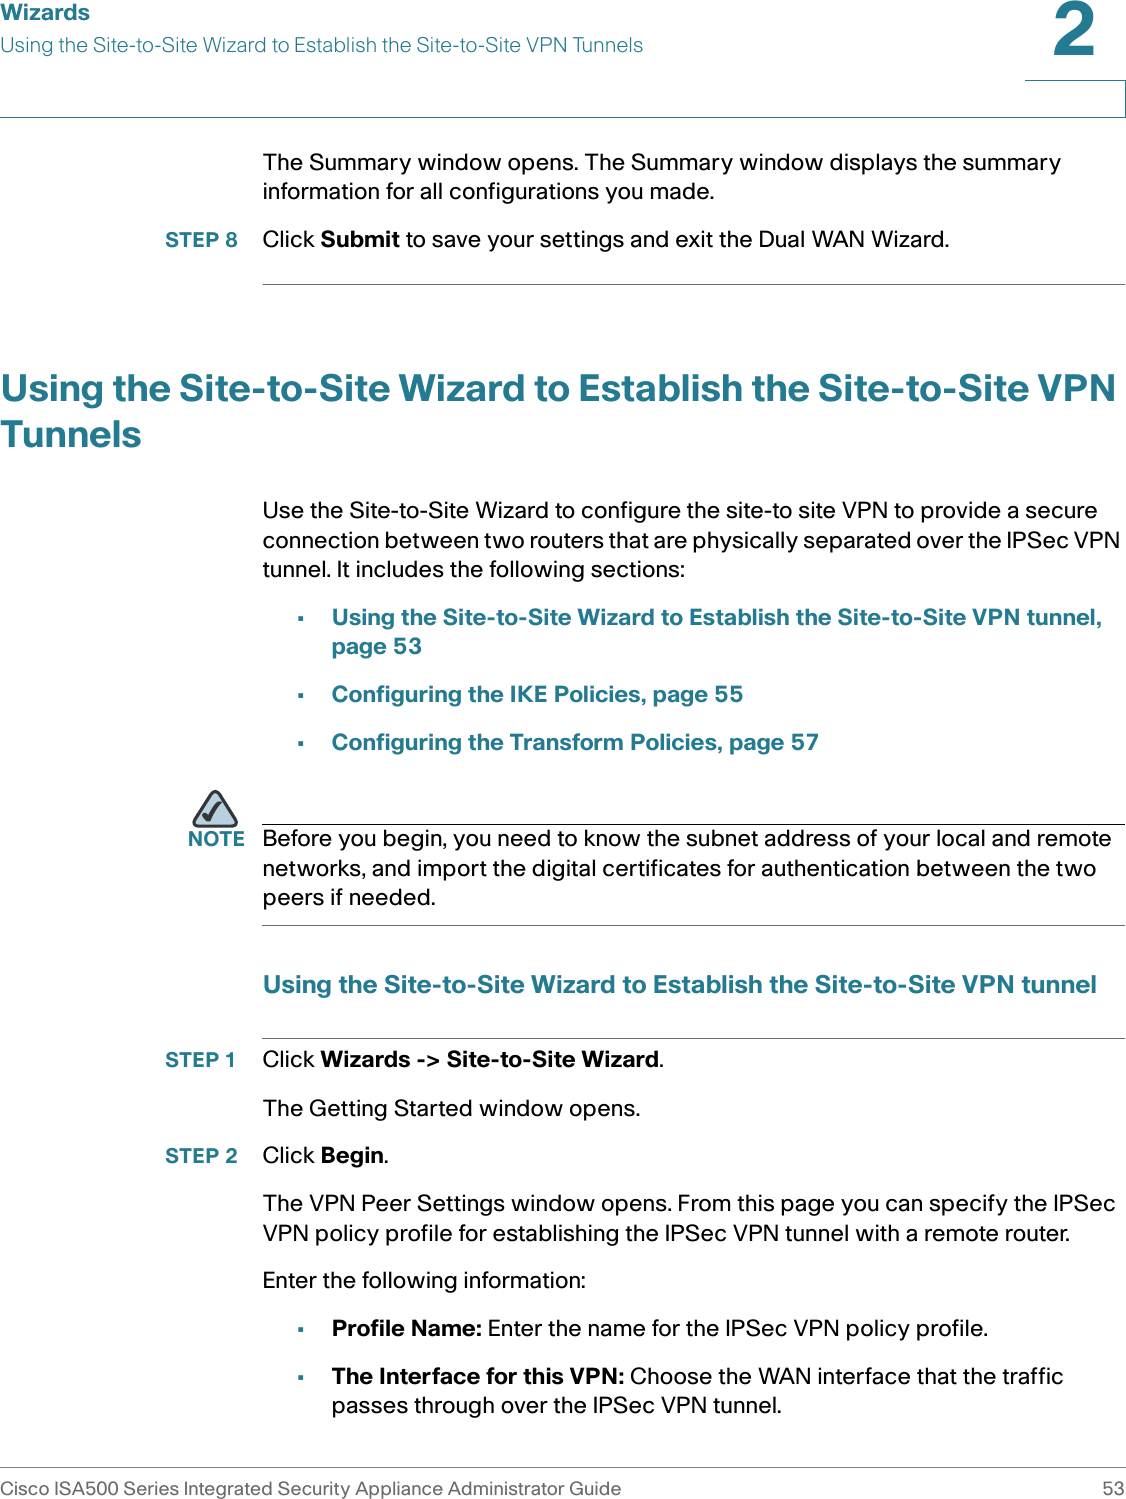 WizardsUsing the Site-to-Site Wizard to Establish the Site-to-Site VPN TunnelsCisco ISA500 Series Integrated Security Appliance Administrator Guide 532 The Summary window opens. The Summary window displays the summary information for all configurations you made.STEP 8 Click Submit to save your settings and exit the Dual WAN Wizard. Using the Site-to-Site Wizard to Establish the Site-to-Site VPN TunnelsUse the Site-to-Site Wizard to configure the site-to site VPN to provide a secure connection between two routers that are physically separated over the IPSec VPN tunnel. It includes the following sections: •Using the Site-to-Site Wizard to Establish the Site-to-Site VPN tunnel, page 53•Configuring the IKE Policies, page 55•Configuring the Transform Policies, page 57NOTE Before you begin, you need to know the subnet address of your local and remote networks, and import the digital certificates for authentication between the two peers if needed. Using the Site-to-Site Wizard to Establish the Site-to-Site VPN tunnelSTEP 1 Click Wizards -&gt; Site-to-Site Wizard. The Getting Started window opens. STEP 2 Click Begin.The VPN Peer Settings window opens. From this page you can specify the IPSec VPN policy profile for establishing the IPSec VPN tunnel with a remote router. Enter the following information: •Profile Name: Enter the name for the IPSec VPN policy profile. •The Interface for this VPN: Choose the WAN interface that the traffic passes through over the IPSec VPN tunnel. 